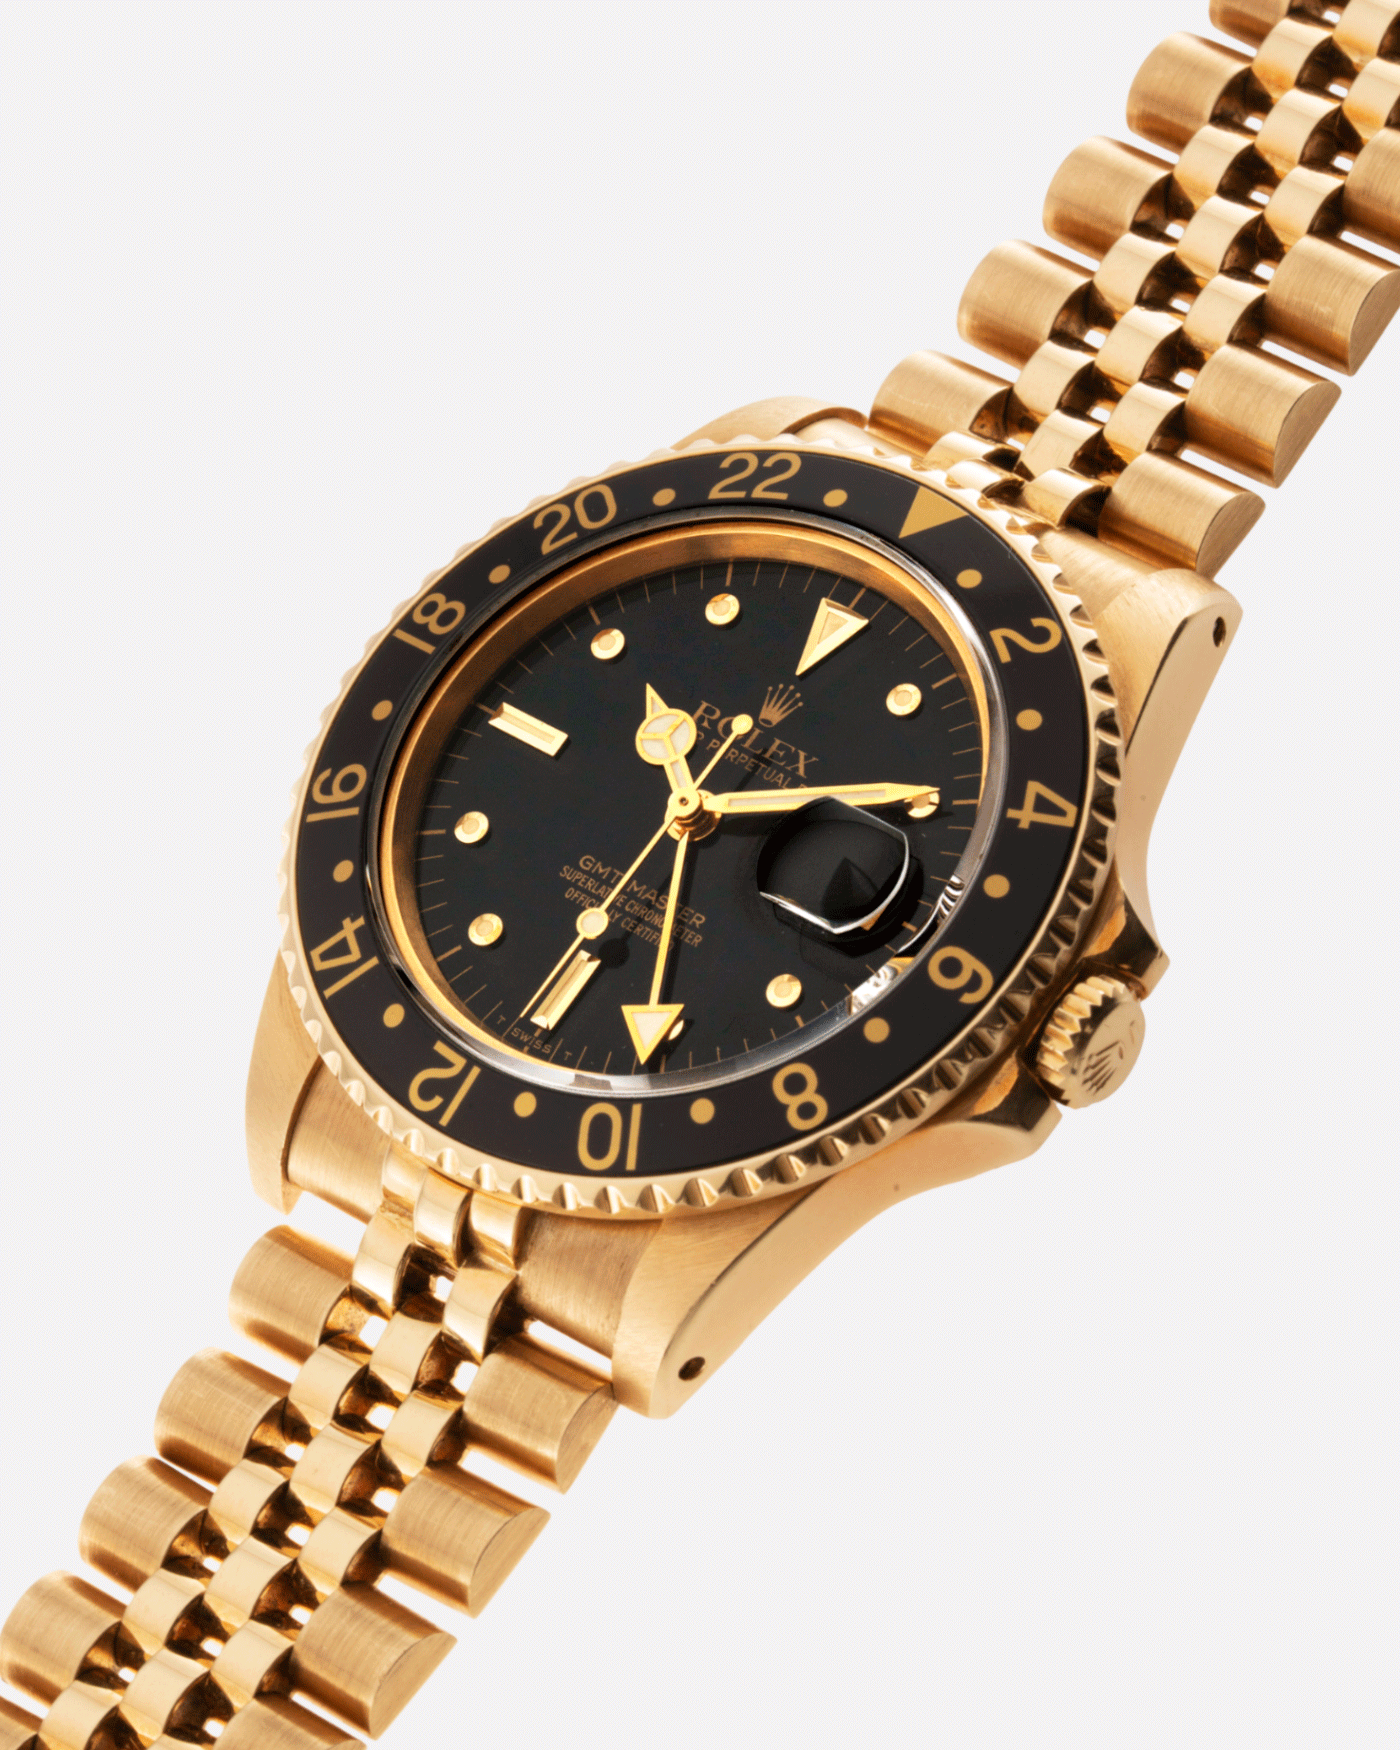 Brand: Rolex Year: 1985 Model: GMT-Master Reference Number: 1675 Serial Number: 8.7 mil Material: 18k Yellow Gold Movement: Cal. 1570 Case Diameter: 40mm Lug Width: 20mm Strap: 18k Yellow Gold Rolex 8386 Jubilee Bracelet with ’47’ End Links